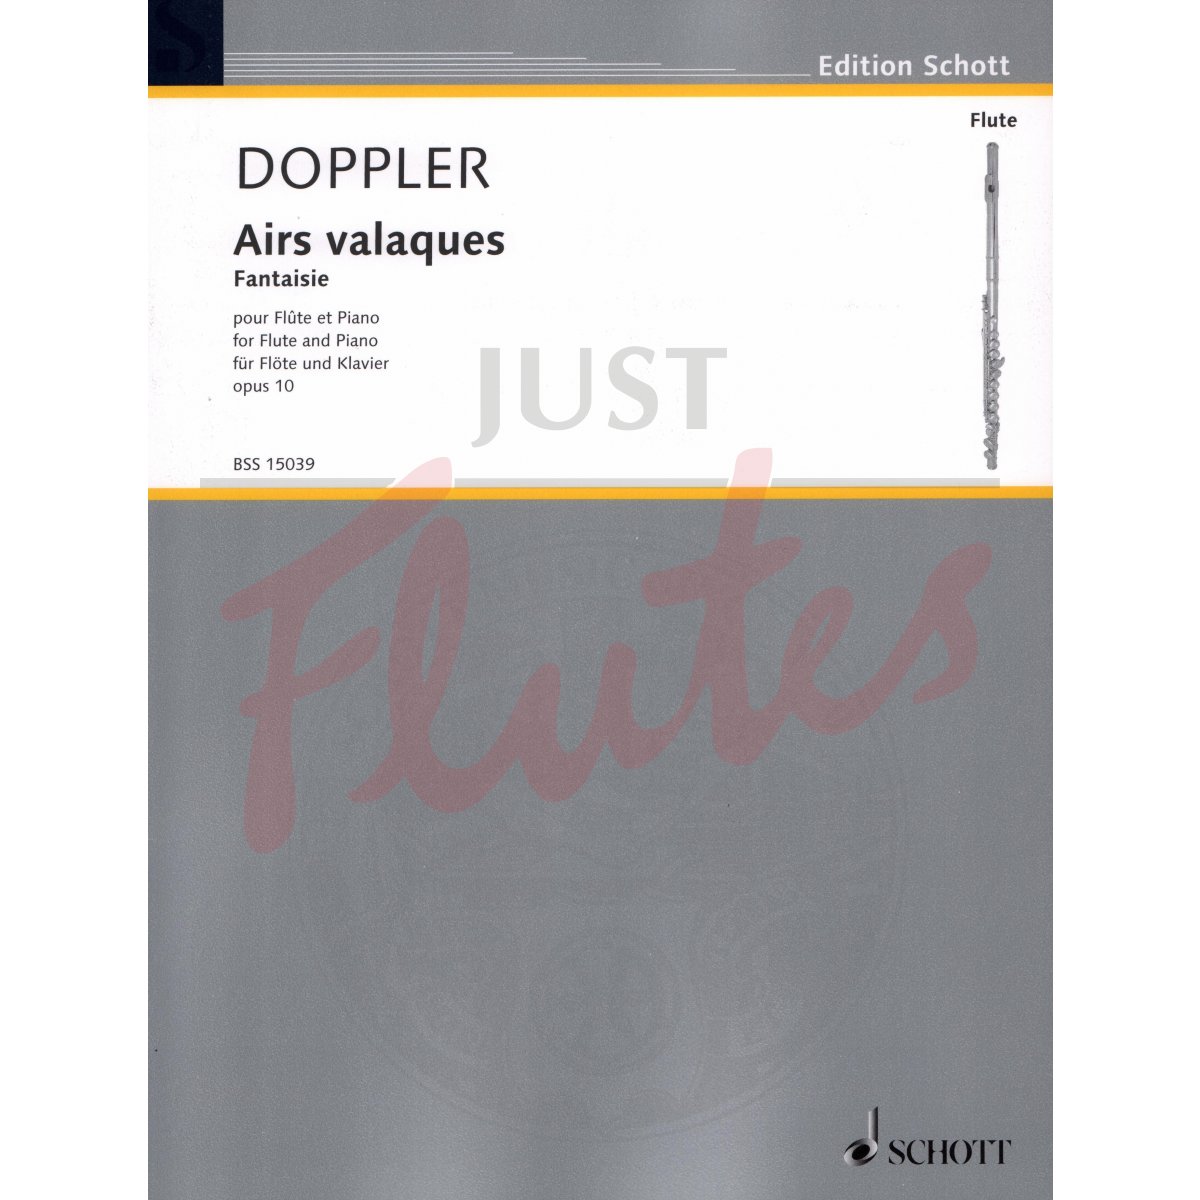 Airs Valaques: Fantaisie for Flute and Piano